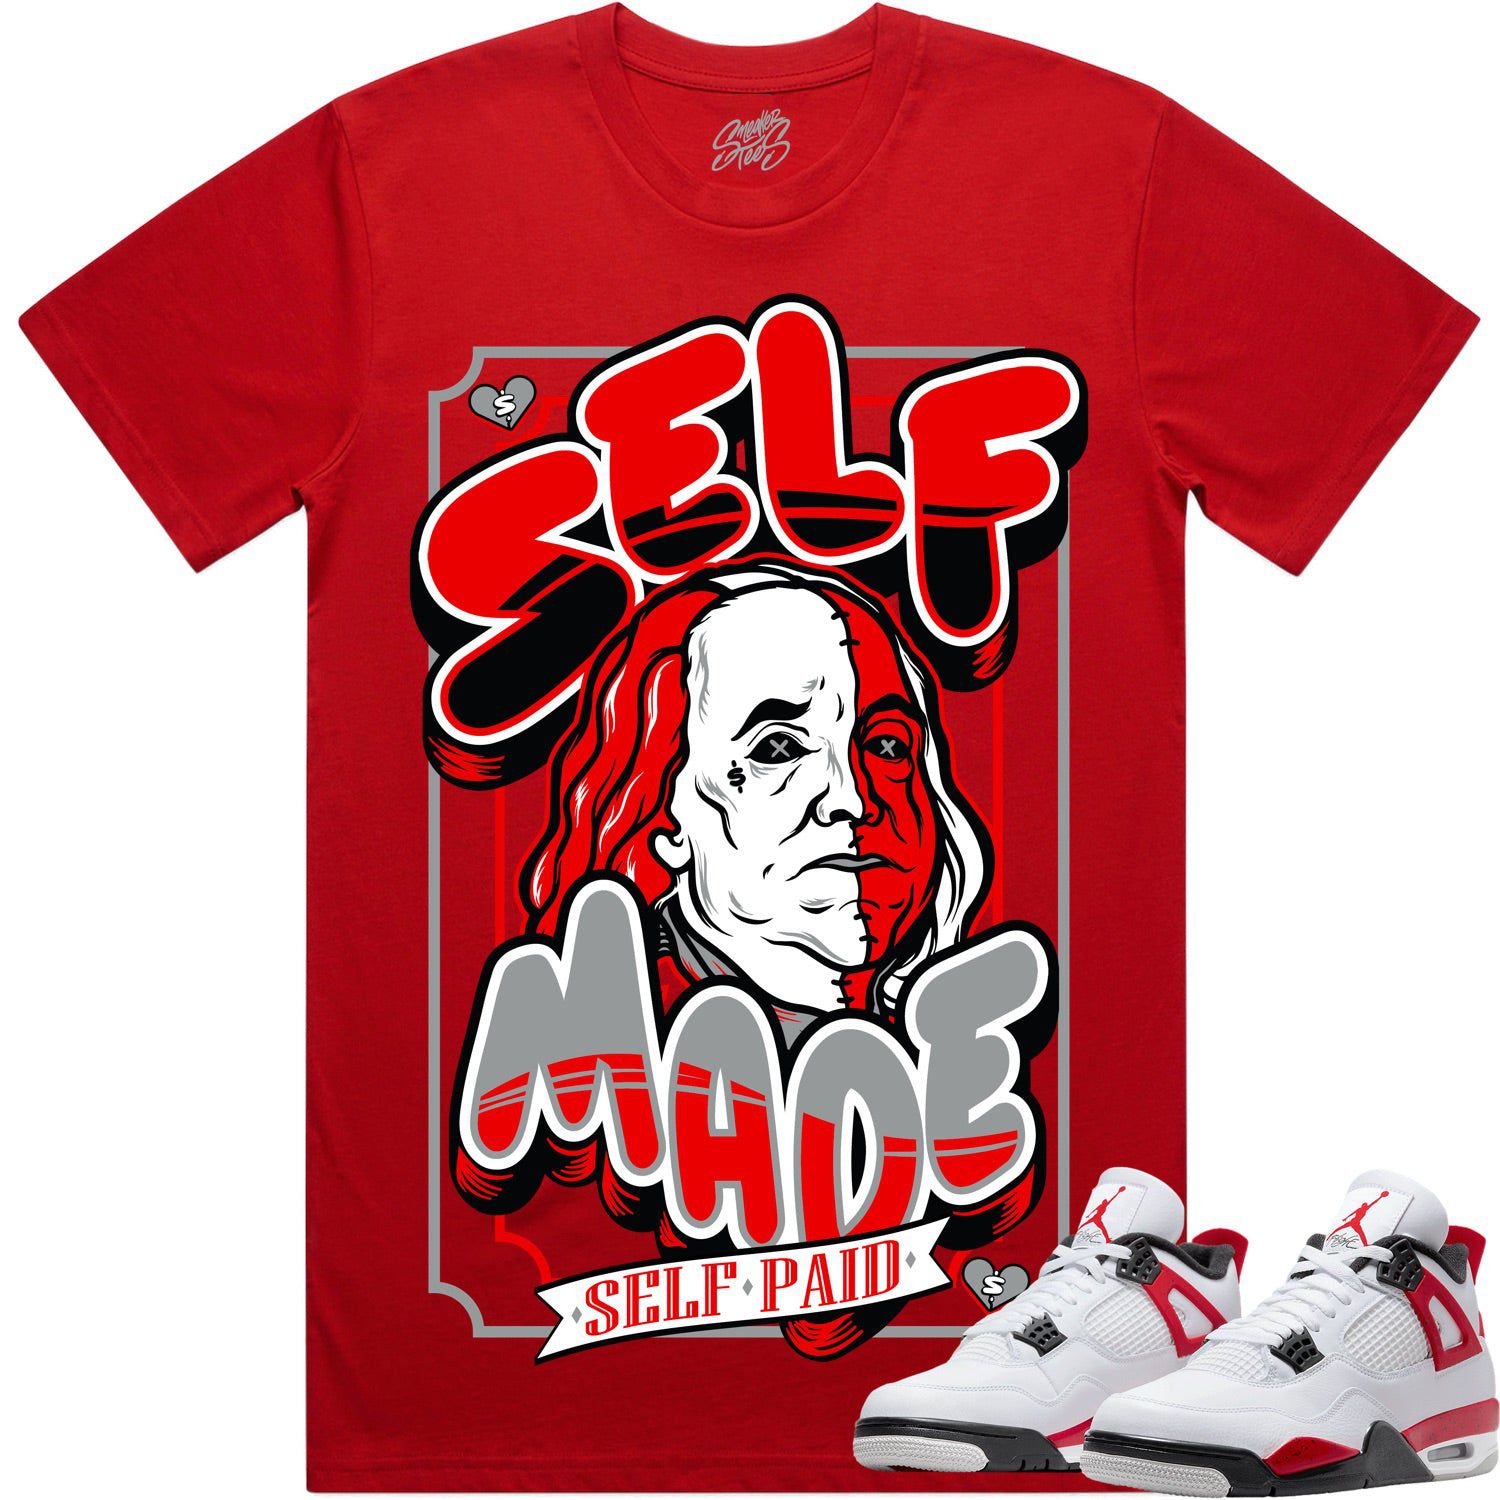 Red Cement 4s Shirt - Jordan Retro 4 Red Cement Shirts - Self Made